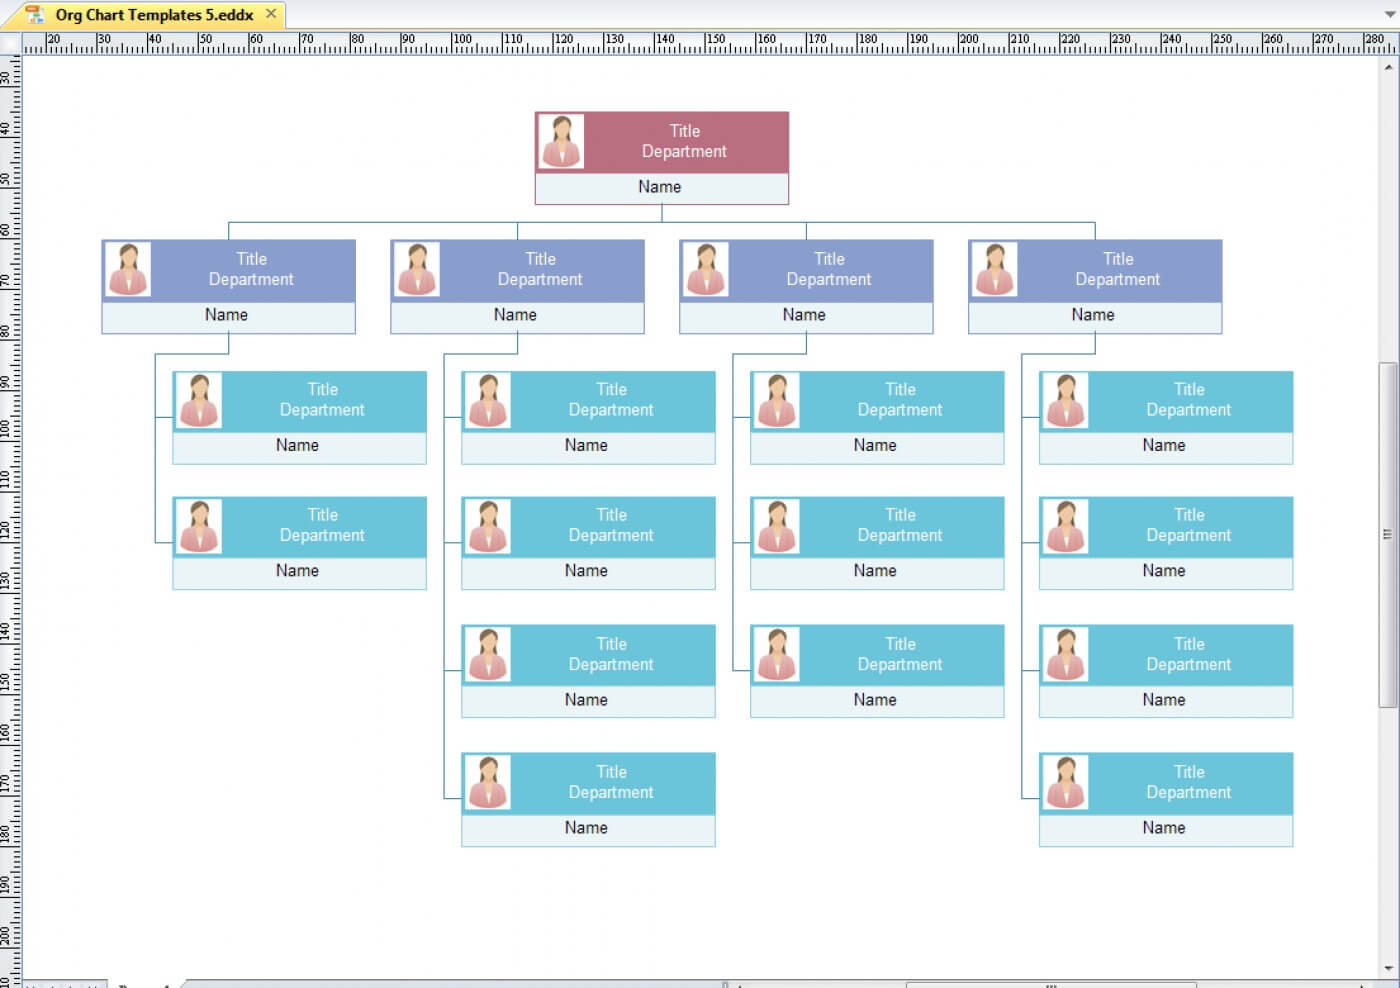 009 Ic Hierarchical Organizational Chart With Pictures Throughout Org Chart Template Word